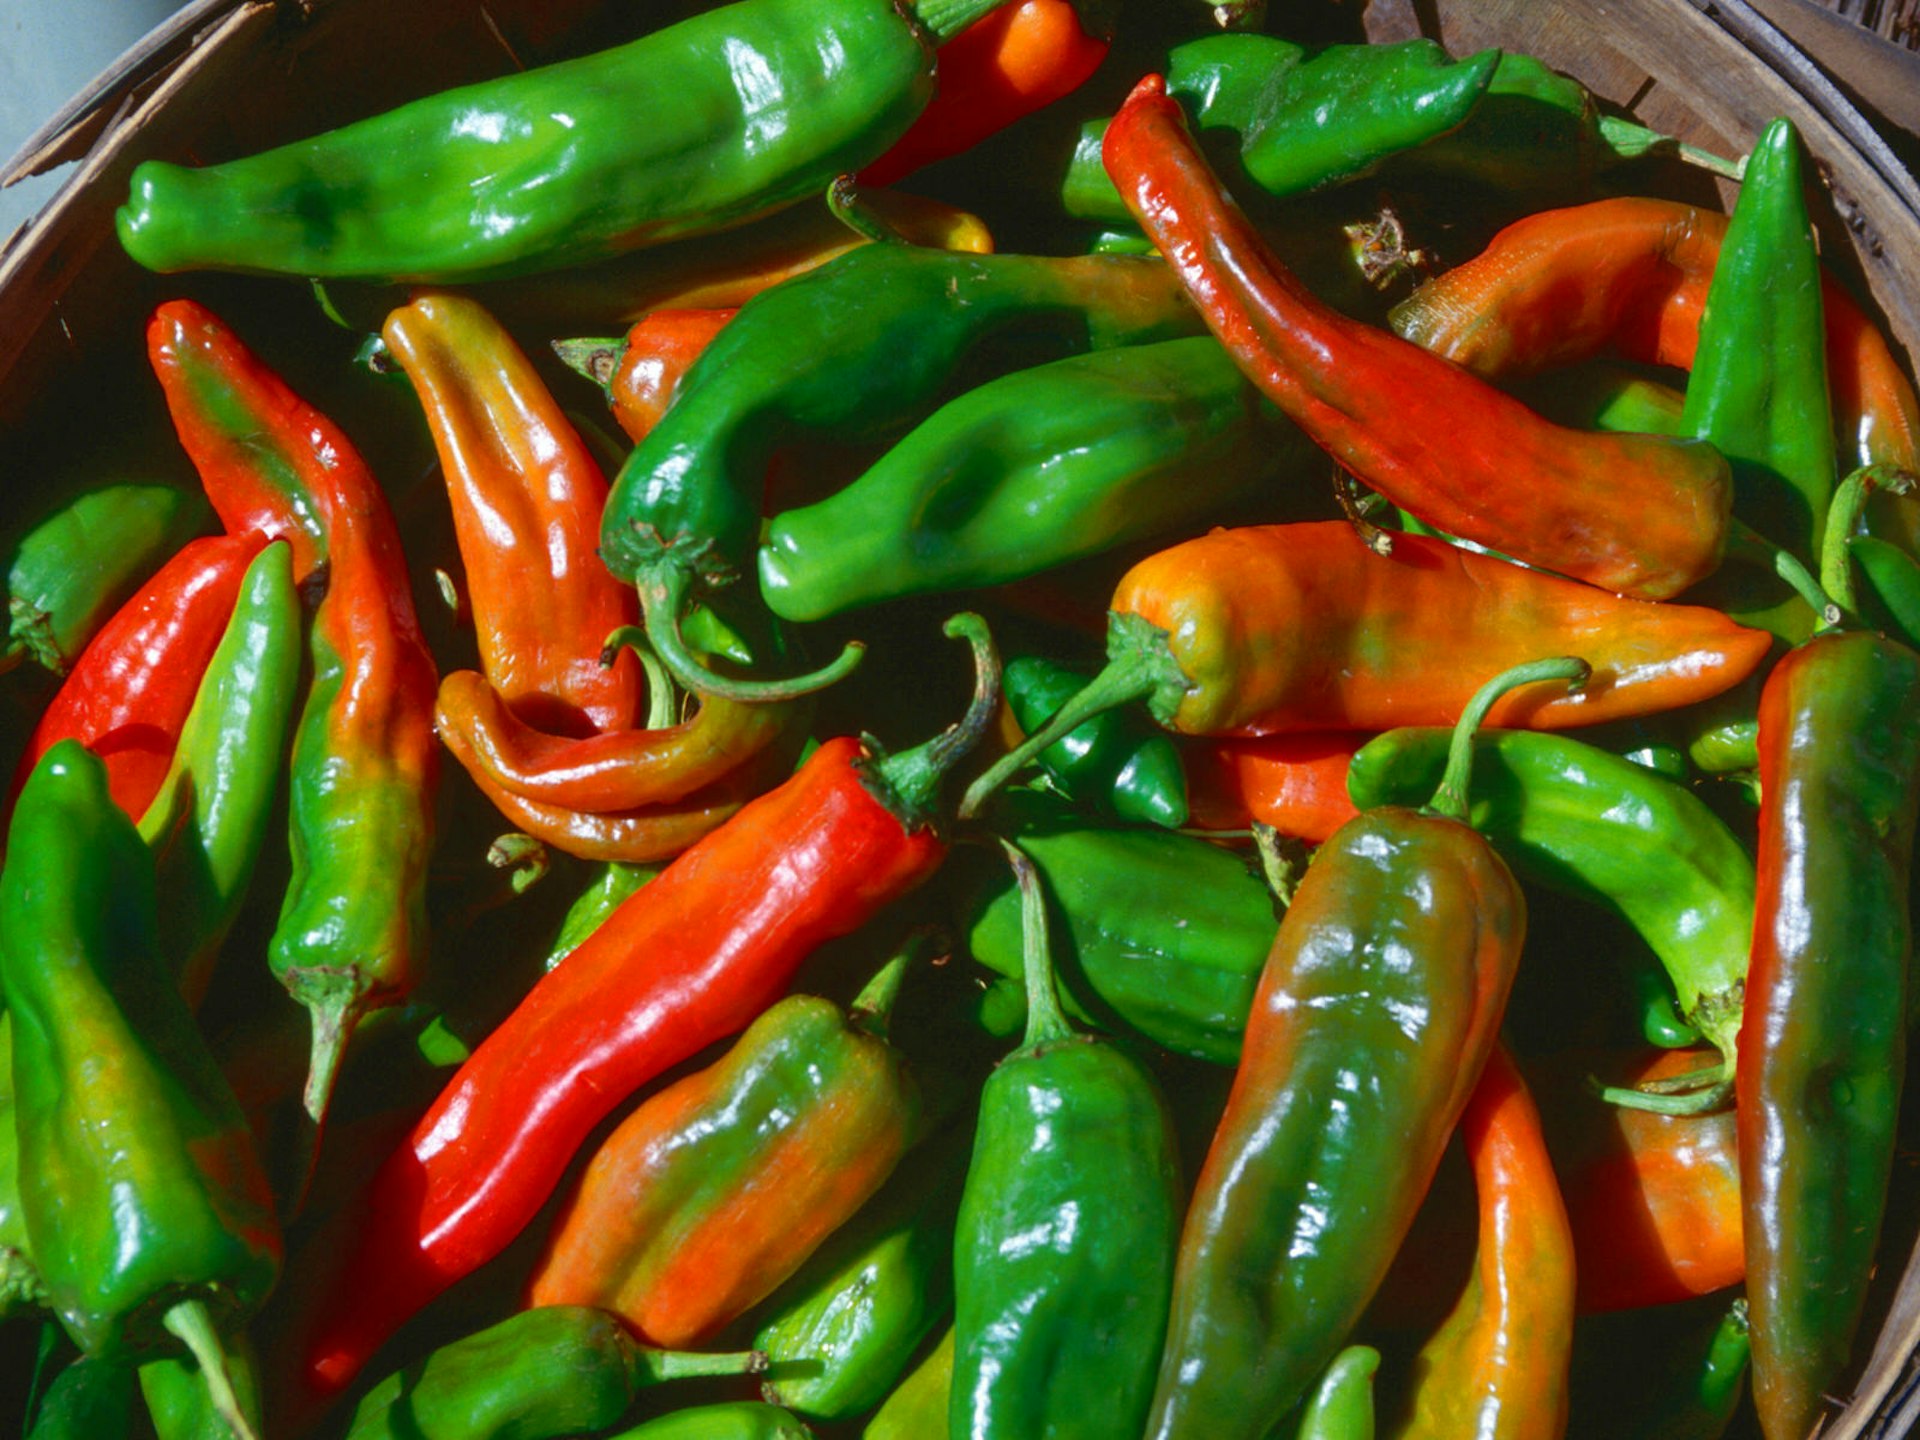 A bushel of half-ripe chiles ready to be roasted © John Elk III / Getty Images